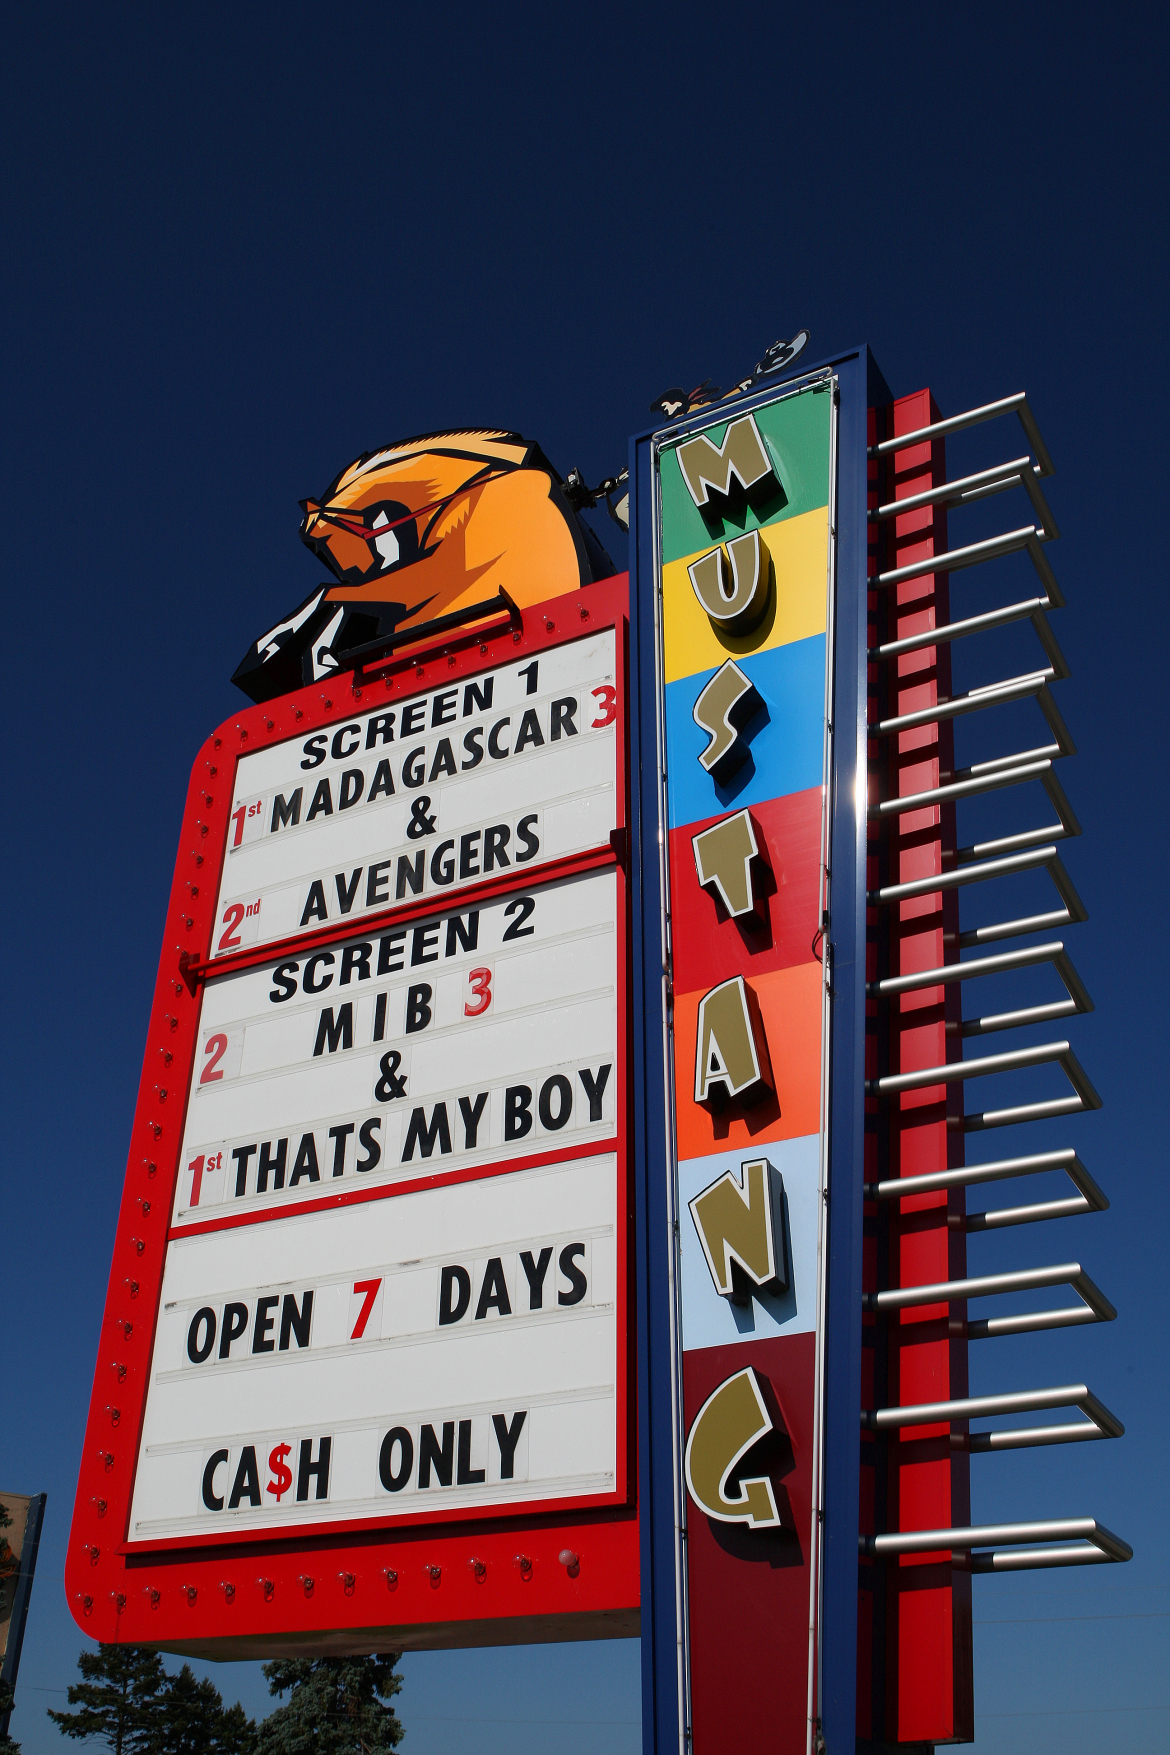 Movie sign from mustang drive in showing what movie are playing for that evening